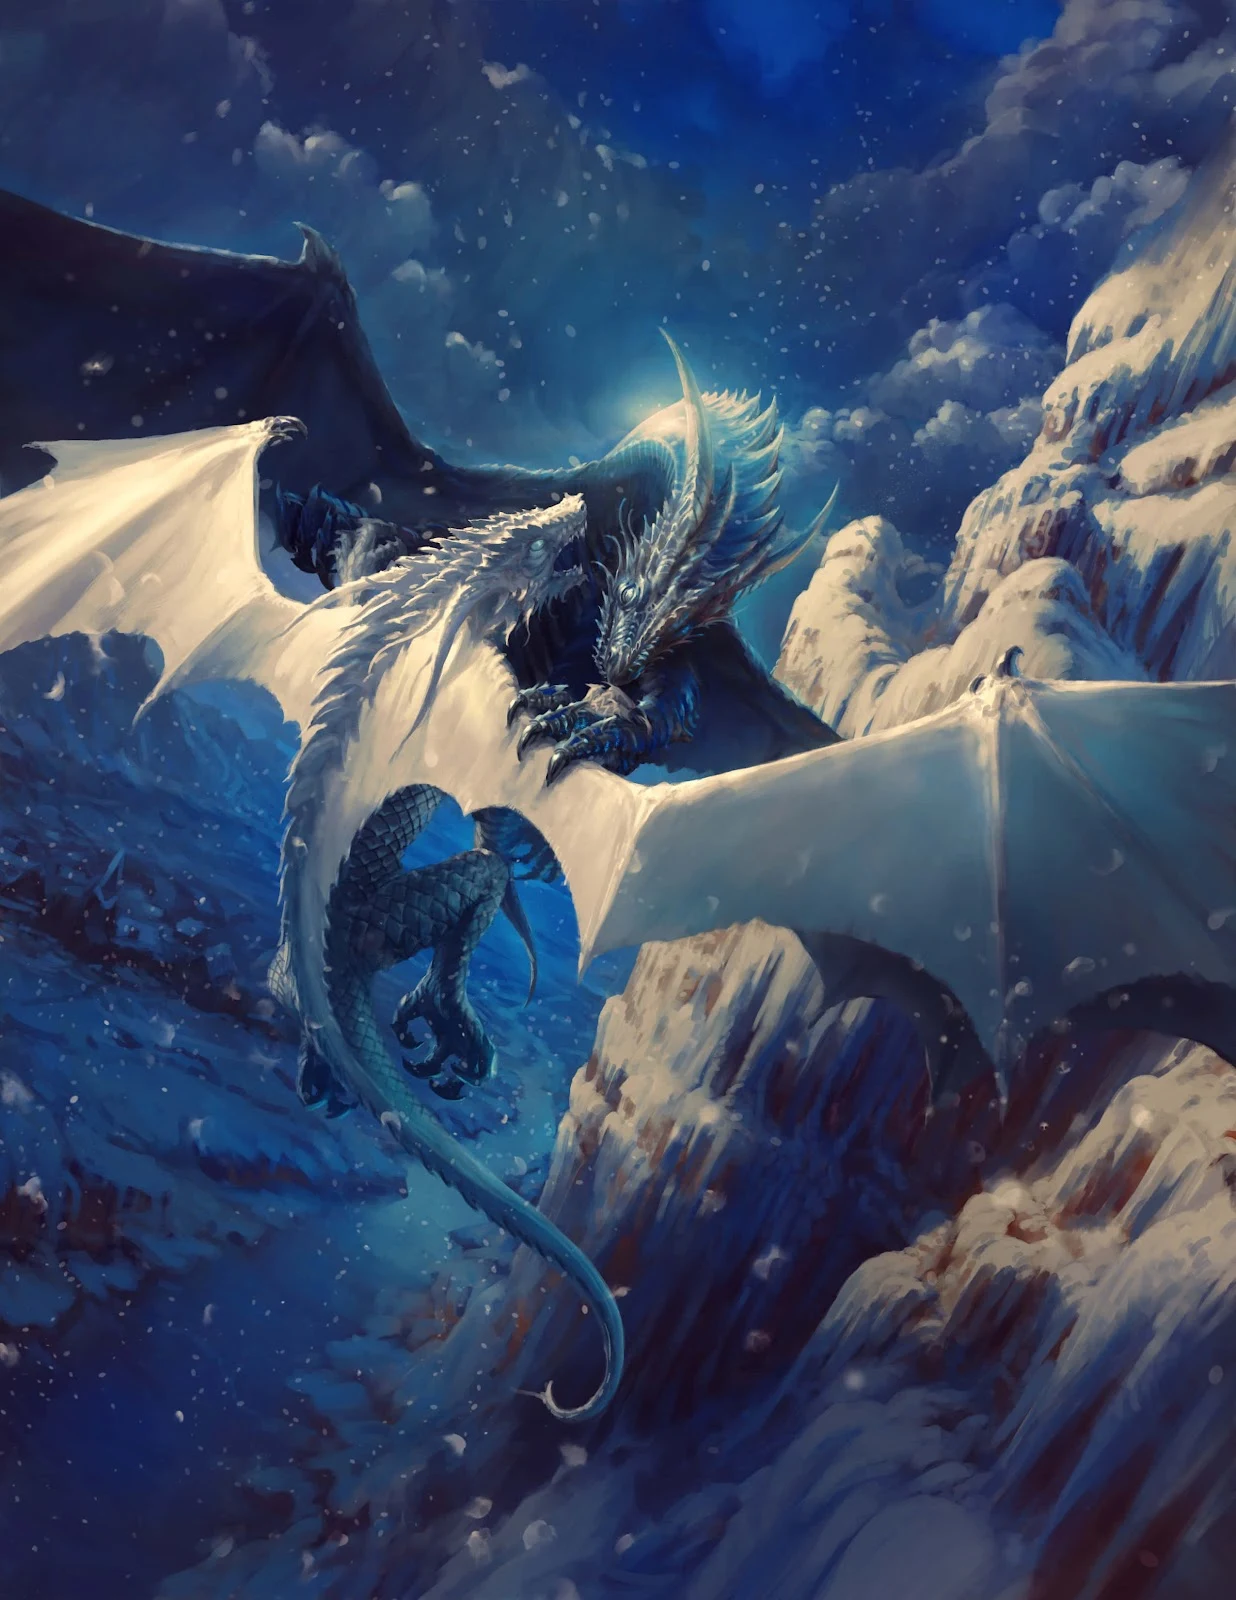 A panoramic view of a majestic dragon soaring across the skies, showcasing the visual spectacle of the series